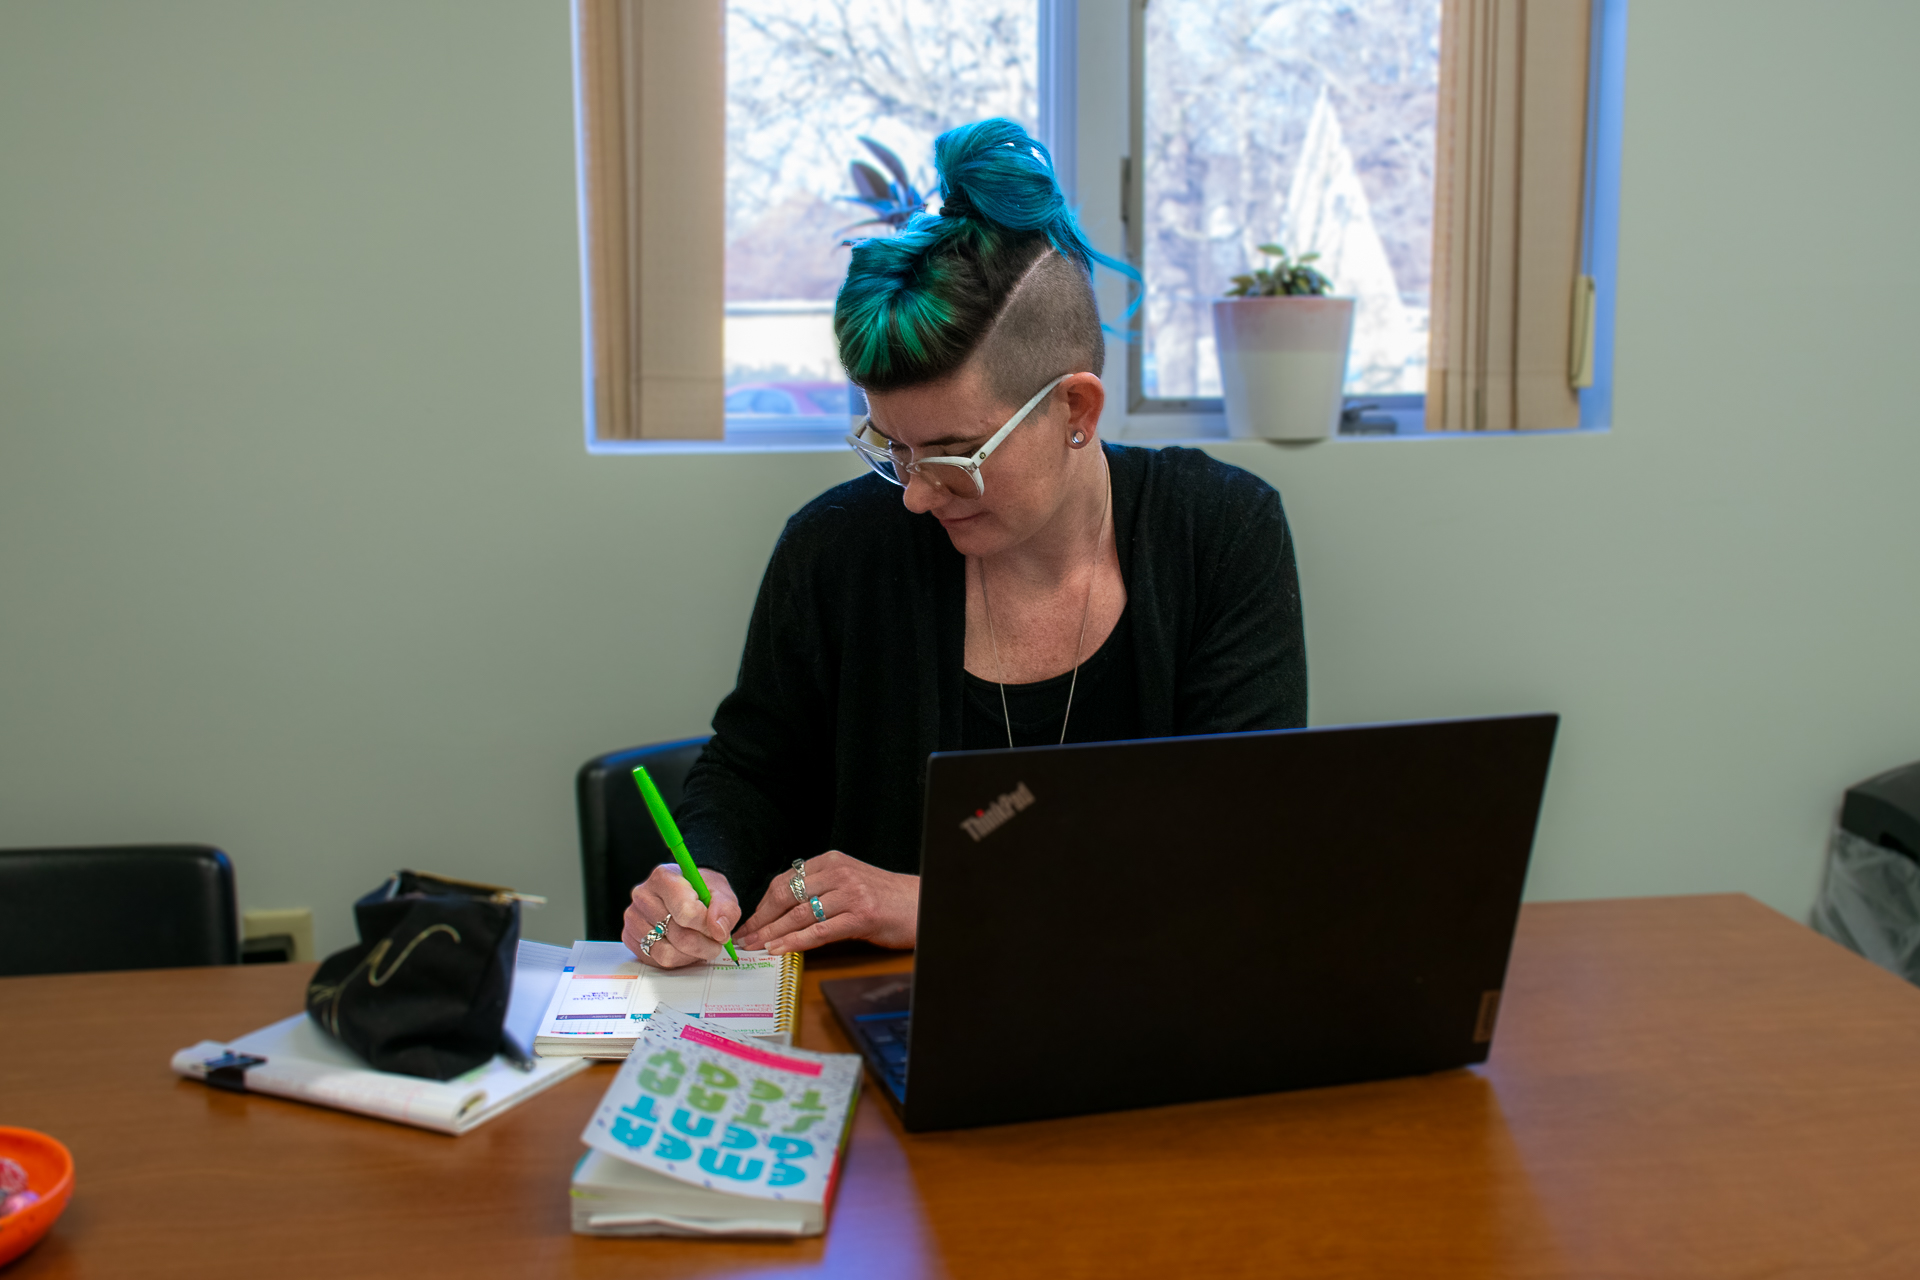 White woman with blue hair working at a table with a laptop